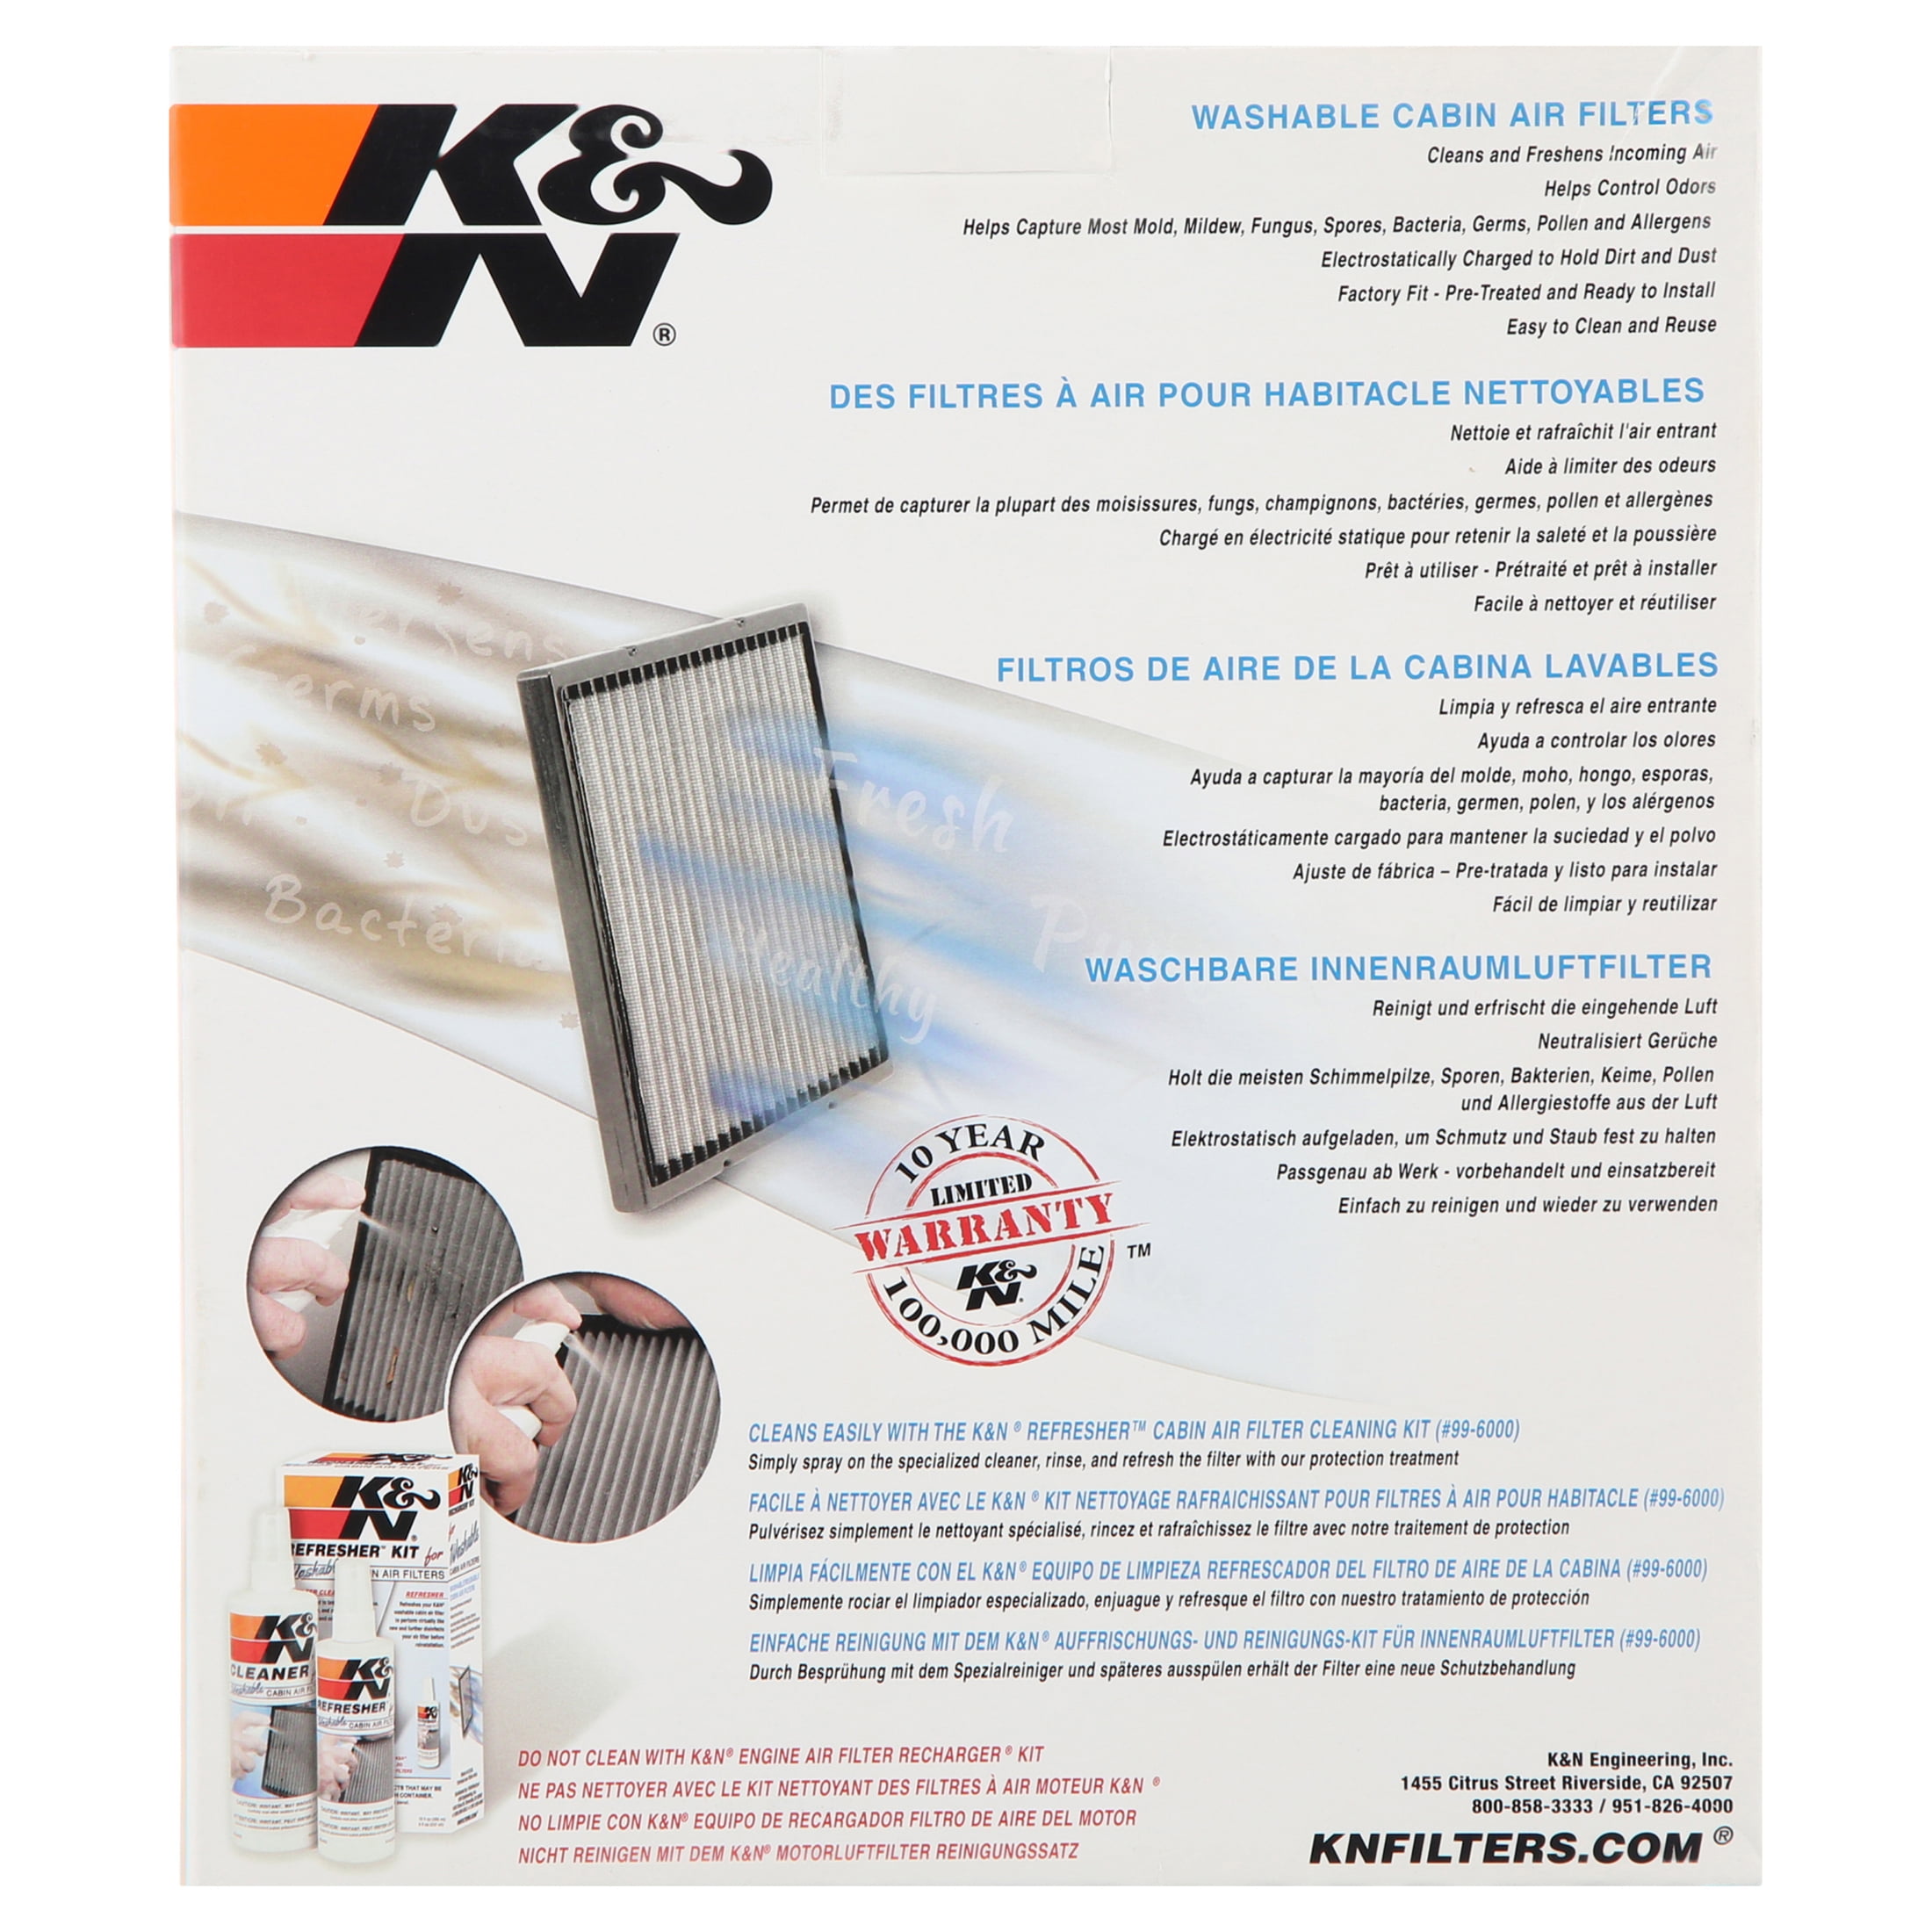 K&N VF2014 Washable & Reusable Cabin Air Filter Cleans and Freshens  Incoming Air for your Kia, Hyundai 